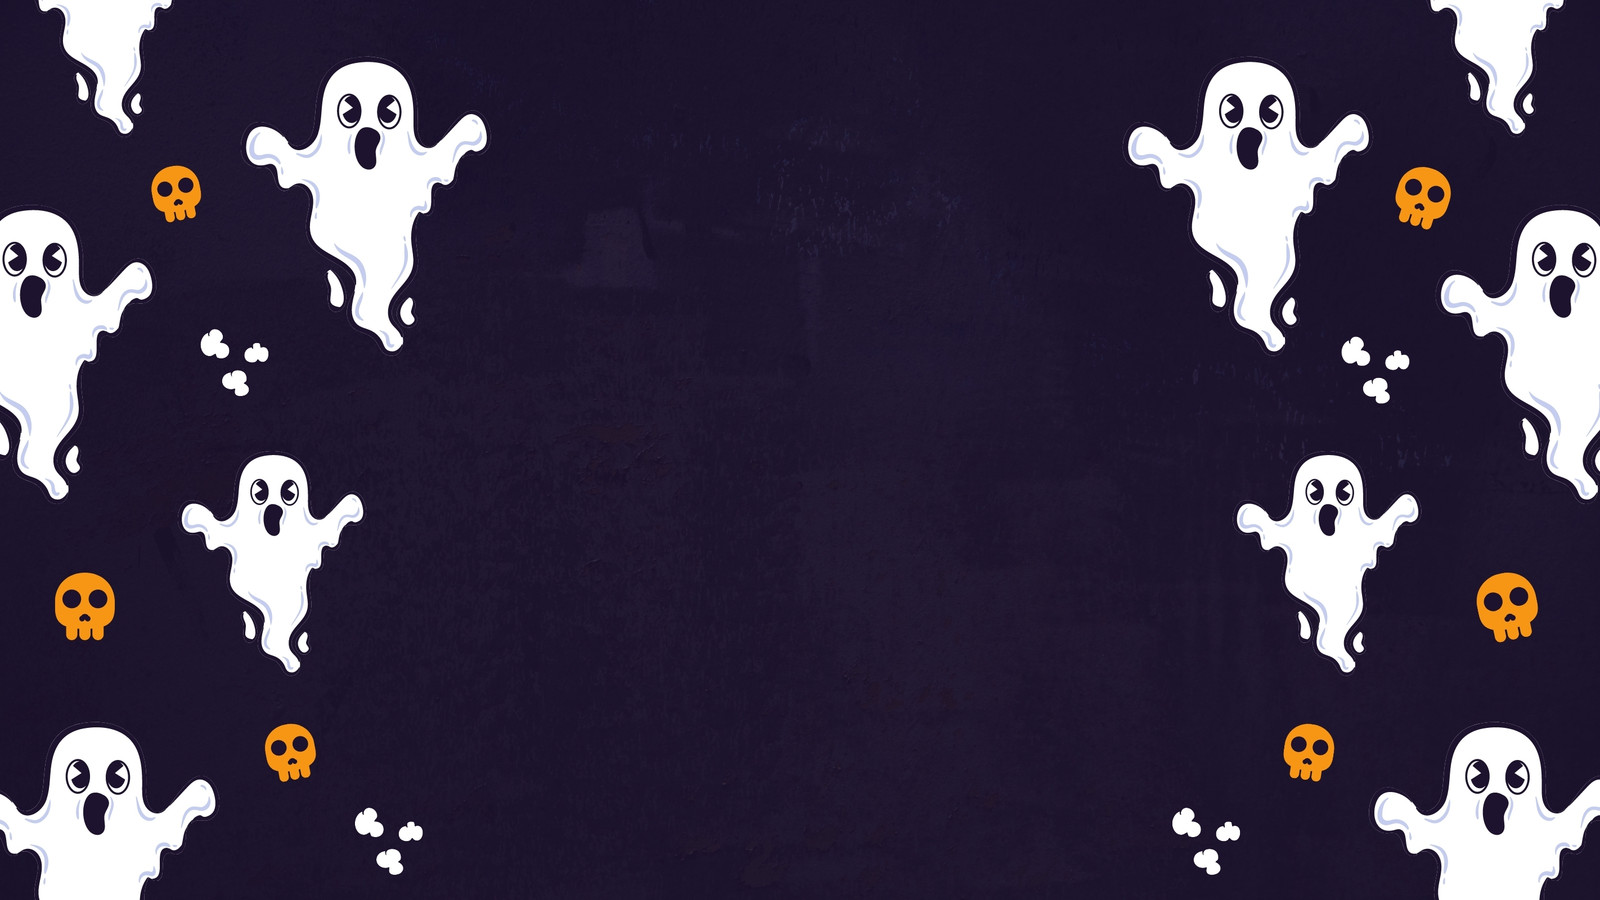 Page 4 - Free Halloween Zoom virtual background templates to edit | Canva